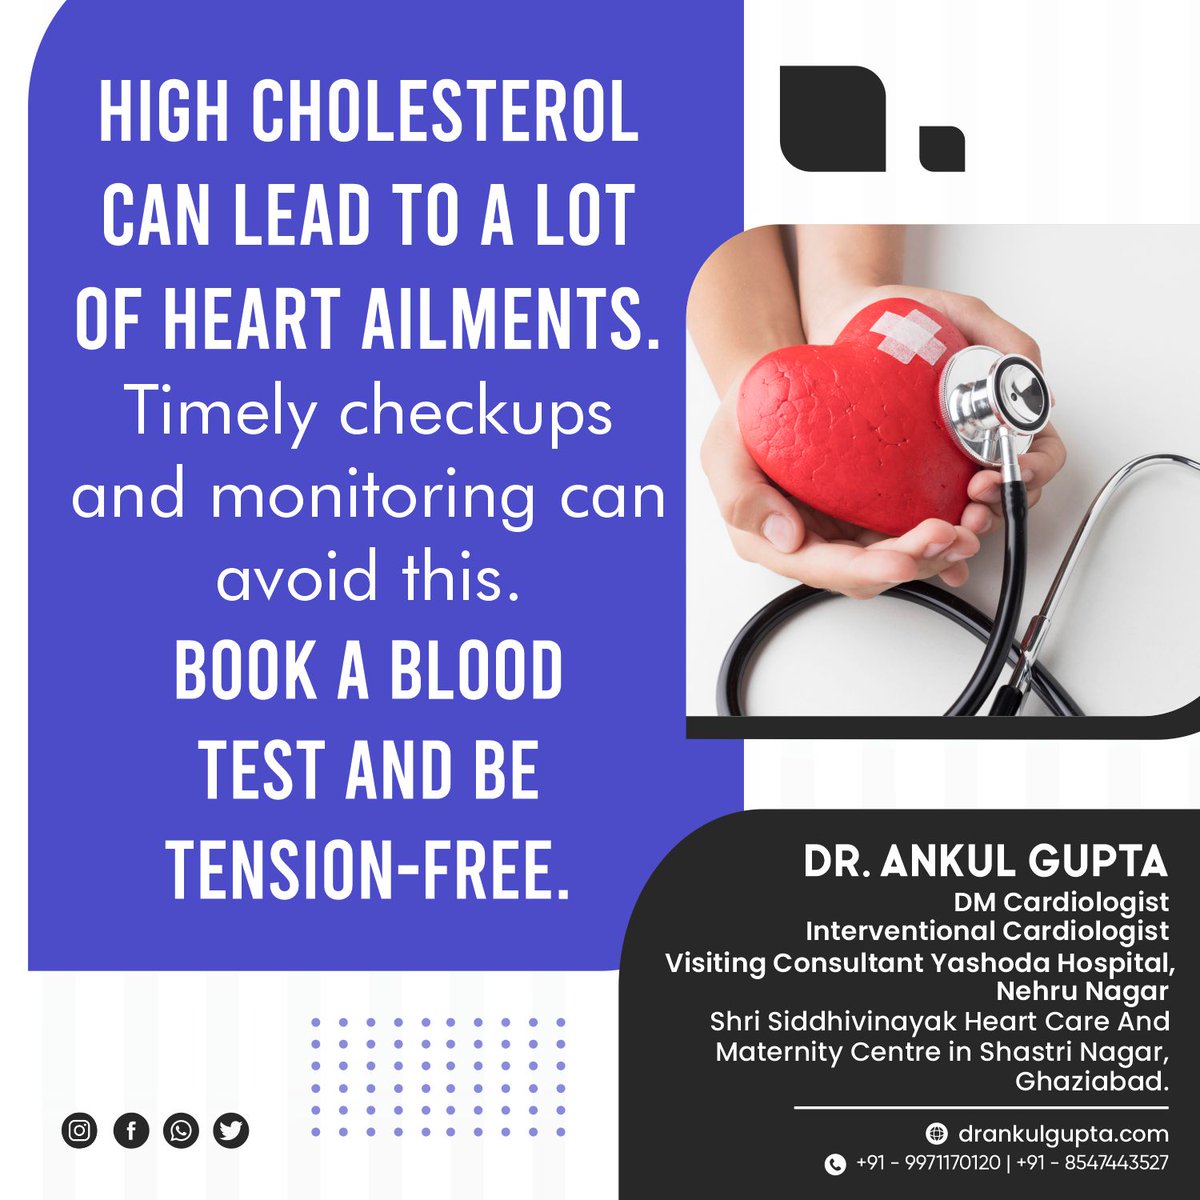 Cholesterol, a fatty substance found in our blood, is essential for our body's functioning. However, when cholesterol levels become elevated.

#cardiology #cardiologist #cardiaccare #cholesterol #highcholesterol #heartspecialist #heartdoctor #cardiaccare